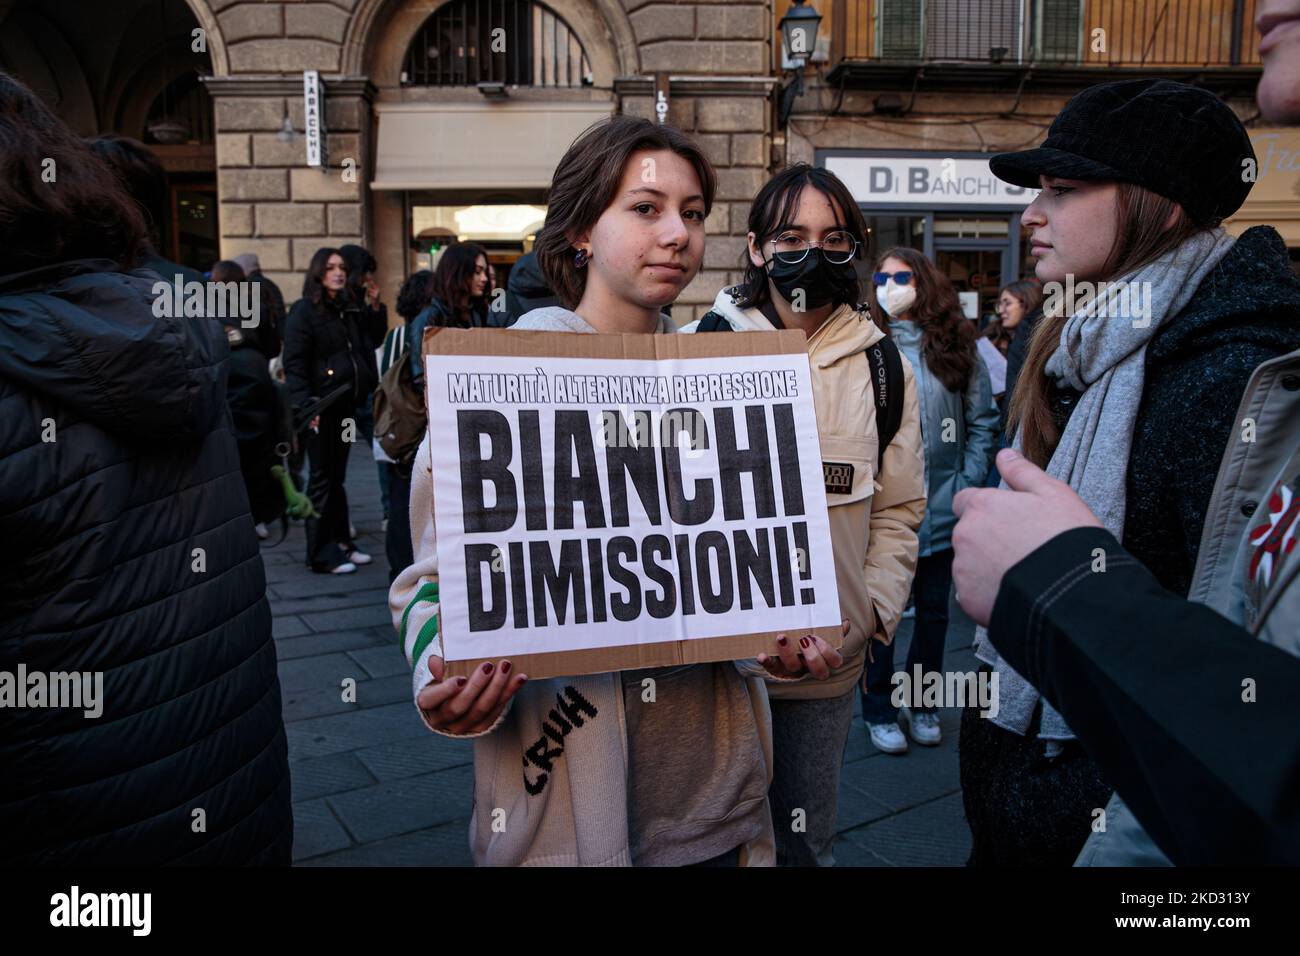 A student holding a sign addressing minister Bianchi to resign during a student protest in Pisa, Italy, on February 18, 2022. Demonstrations happened all across Italy to contest the school-work internship project where the 18-year-old Lorenzo Parelli died in an accident in January in the province of Udine and Giuseppe Lenoci died in a car accident on Monday 14th February in Fermo's province. (Photo by Enrico Mattia Del Punta/NurPhoto) Stock Photo